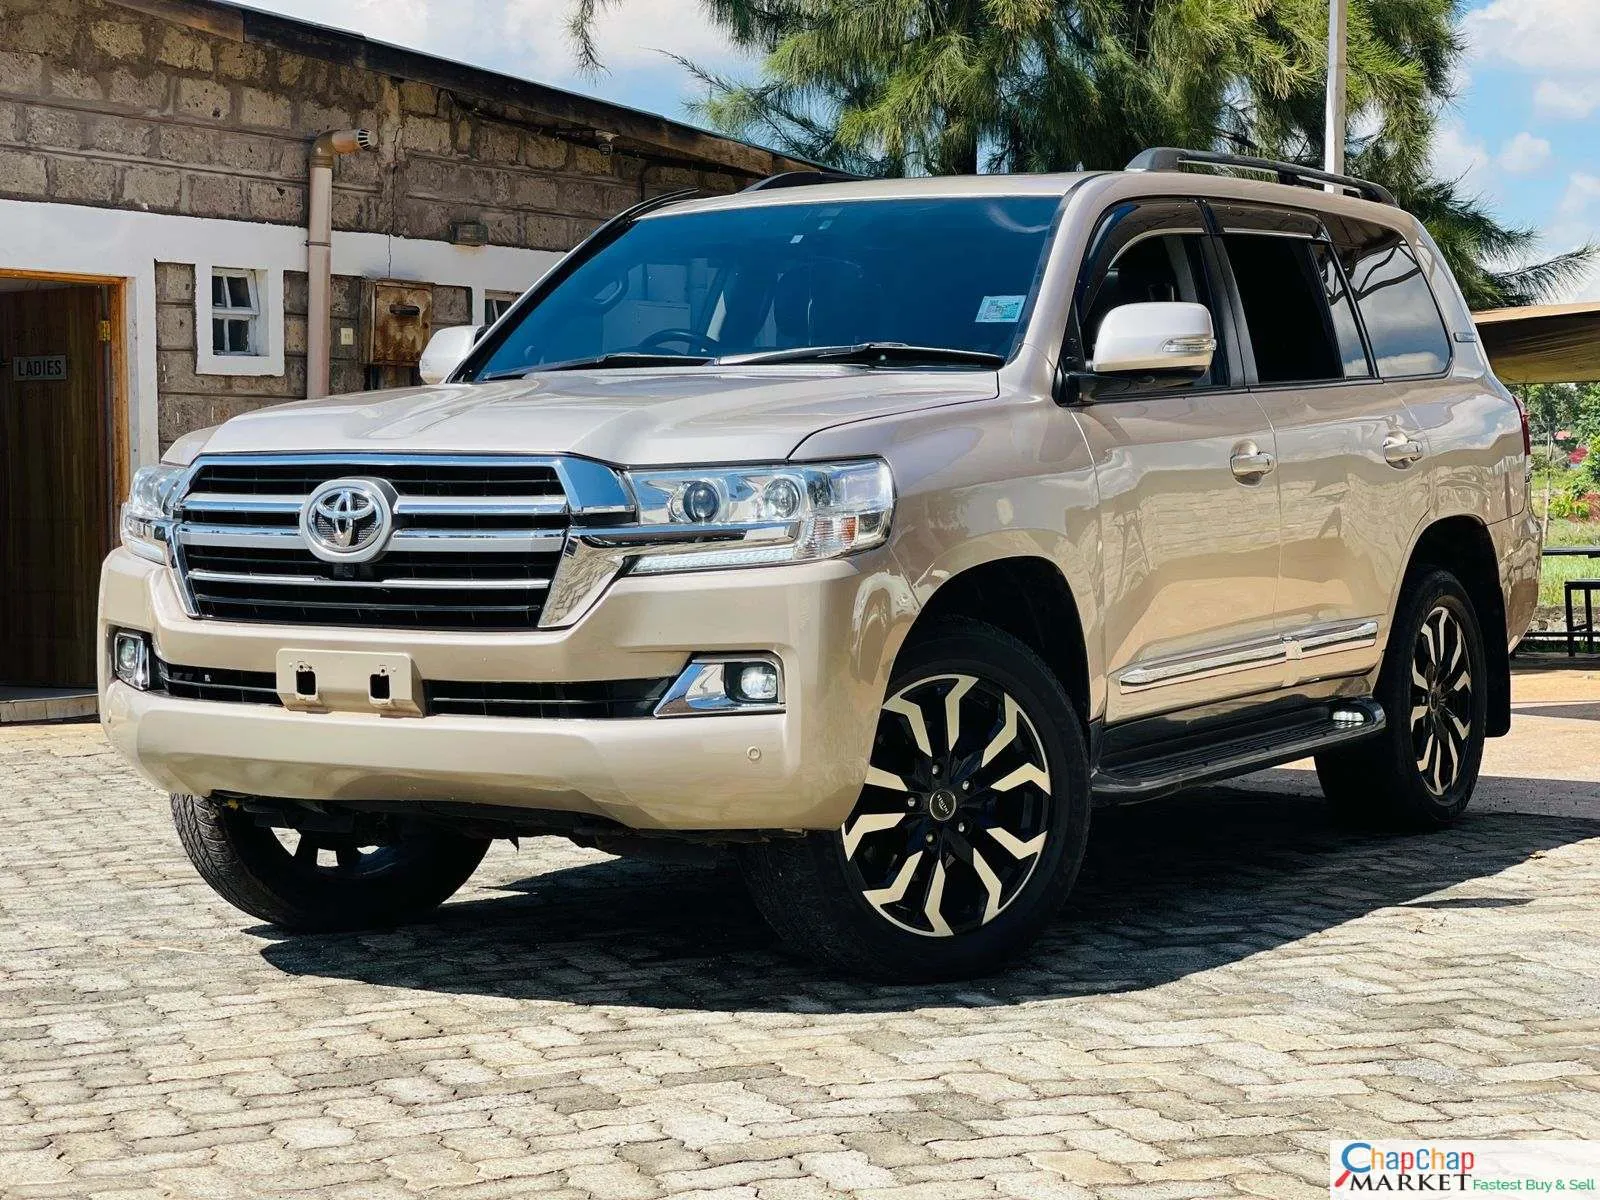 Toyota Land cruiser VX V8 DIESEL 2011 SUNROOF leather LOCAL ASSEMBLY TRADE IN OK EXCLUSIVE for Sale in Kenya